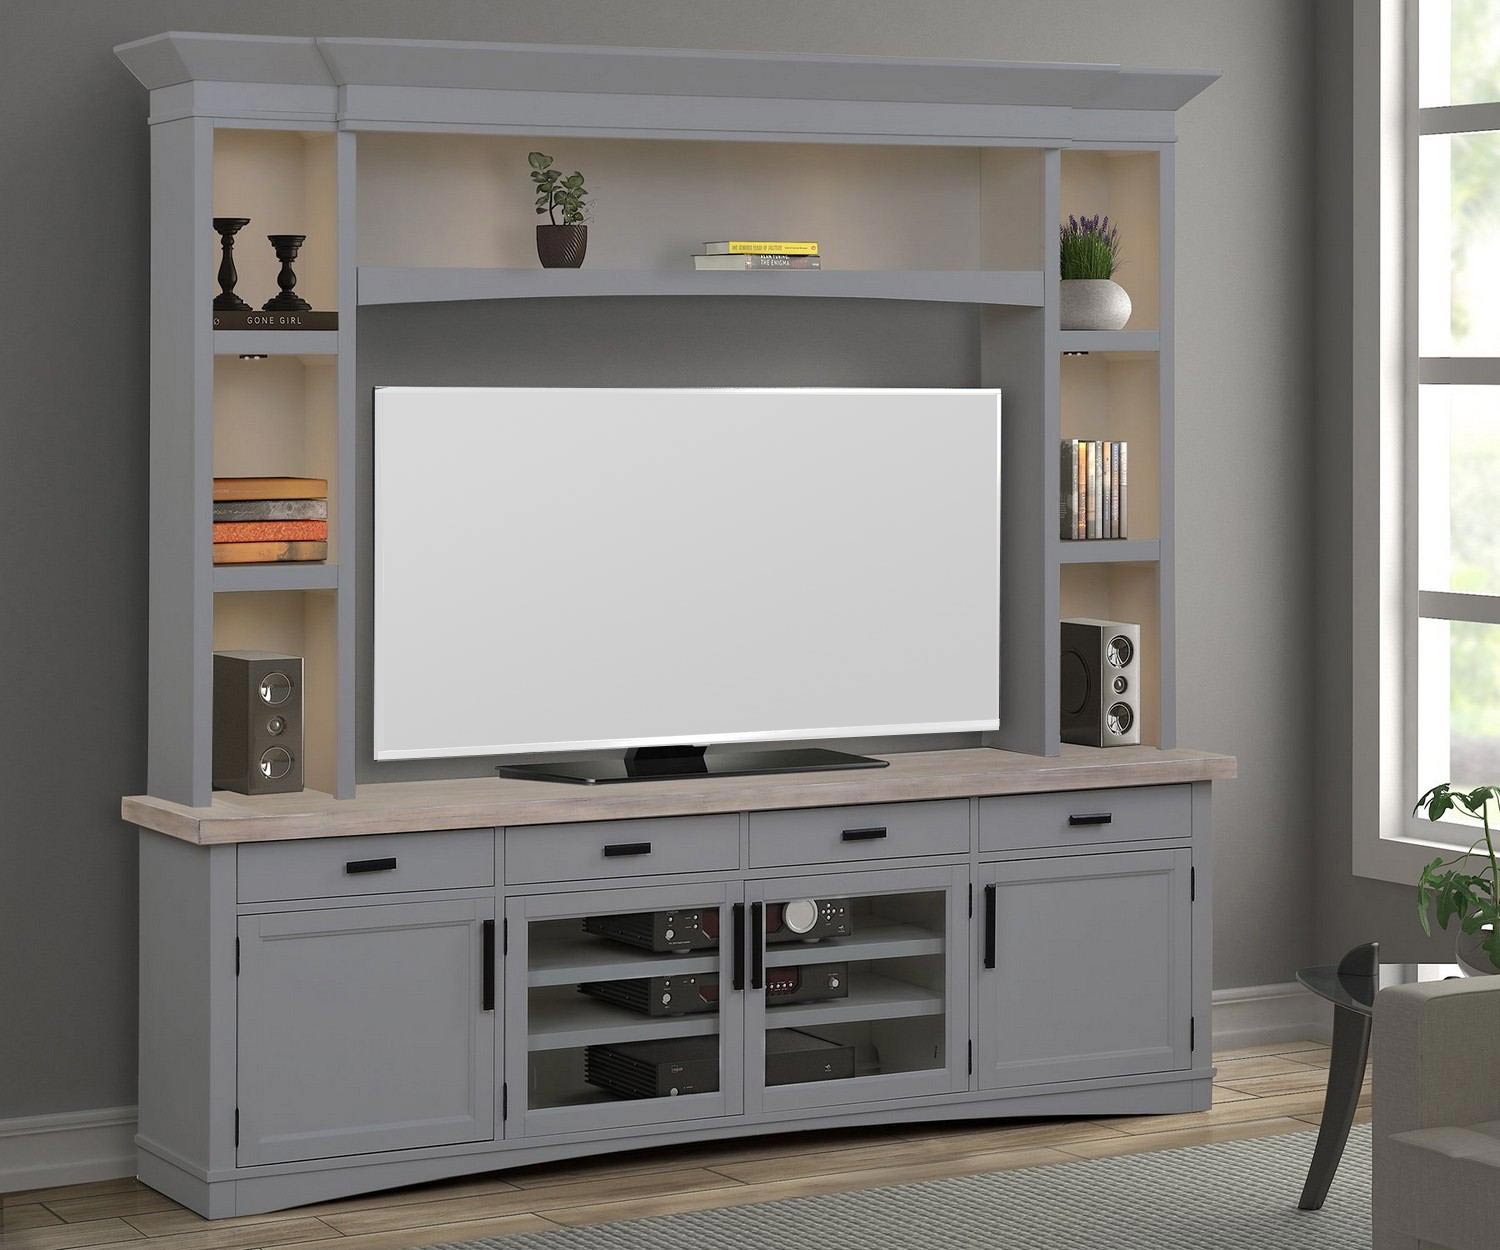 Parker House Americana Modern 92 Inch TV Console with Hutch and LED Lights - Dove